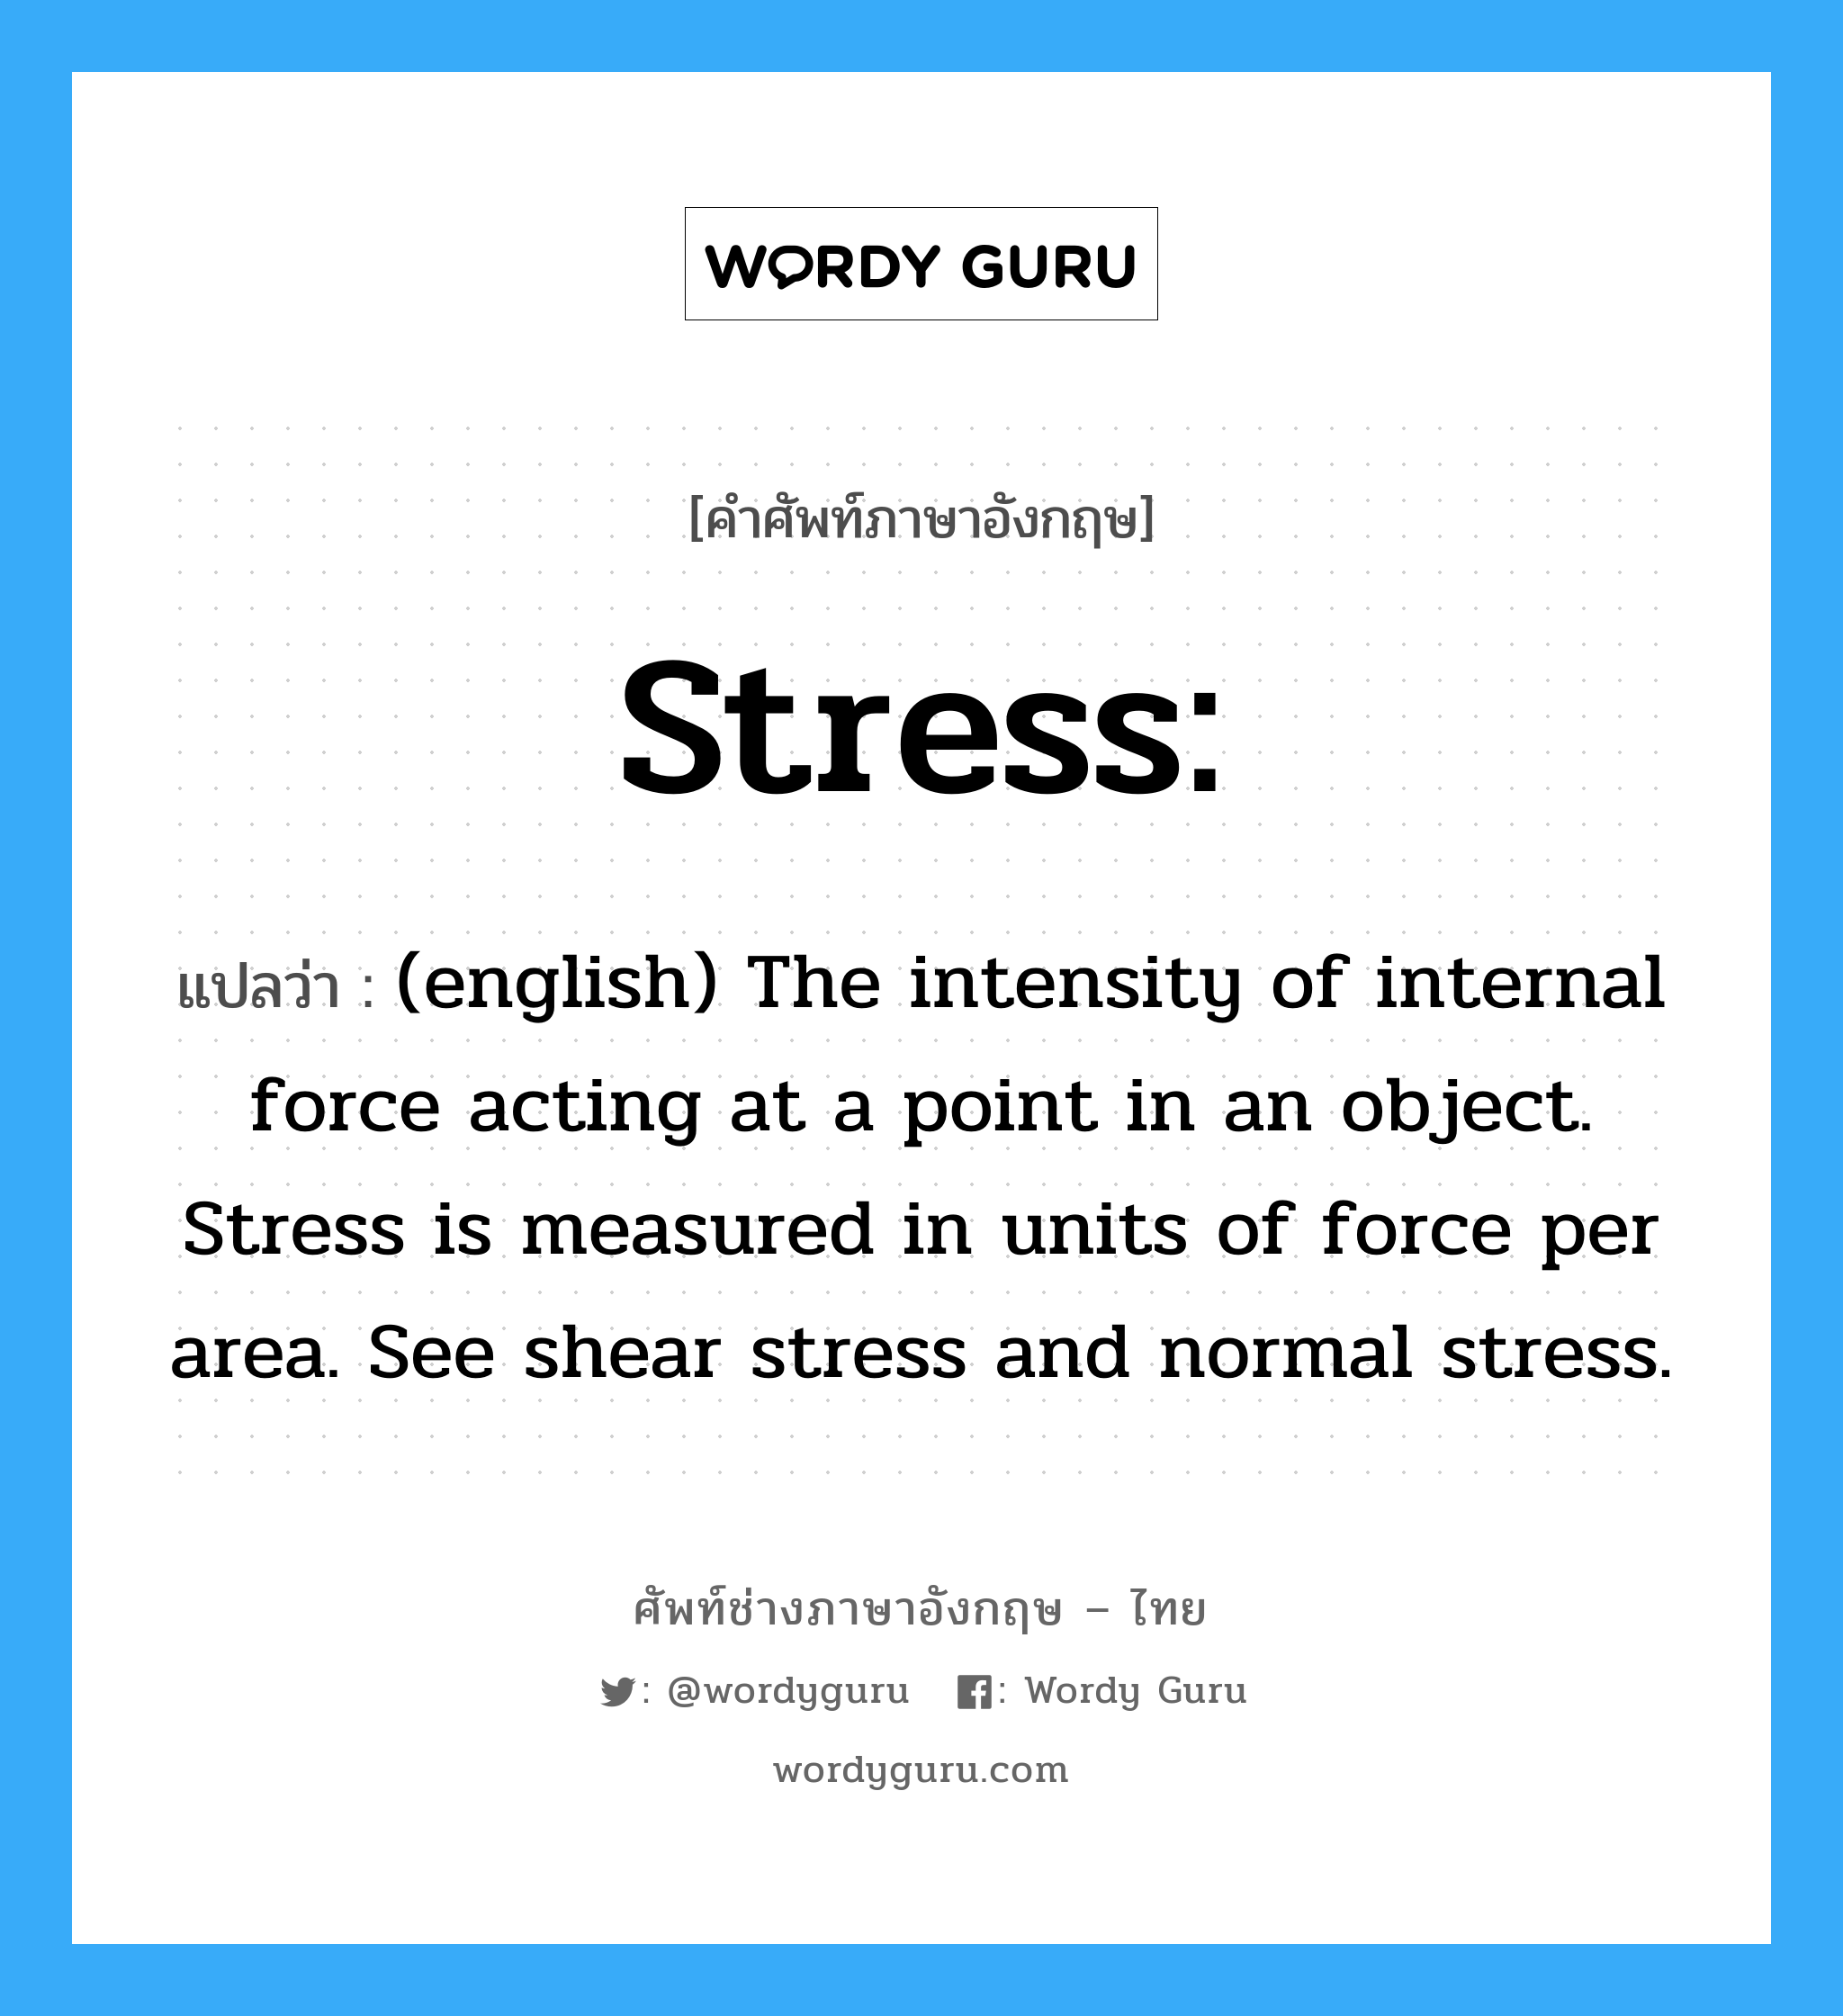 (english) The intensity of internal force acting at a point in an object. Stress is measured in units of force per area. See shear stress and normal stress. ภาษาอังกฤษ?, คำศัพท์ช่างภาษาอังกฤษ - ไทย (english) The intensity of internal force acting at a point in an object. Stress is measured in units of force per area. See shear stress and normal stress. คำศัพท์ภาษาอังกฤษ (english) The intensity of internal force acting at a point in an object. Stress is measured in units of force per area. See shear stress and normal stress. แปลว่า Stress: